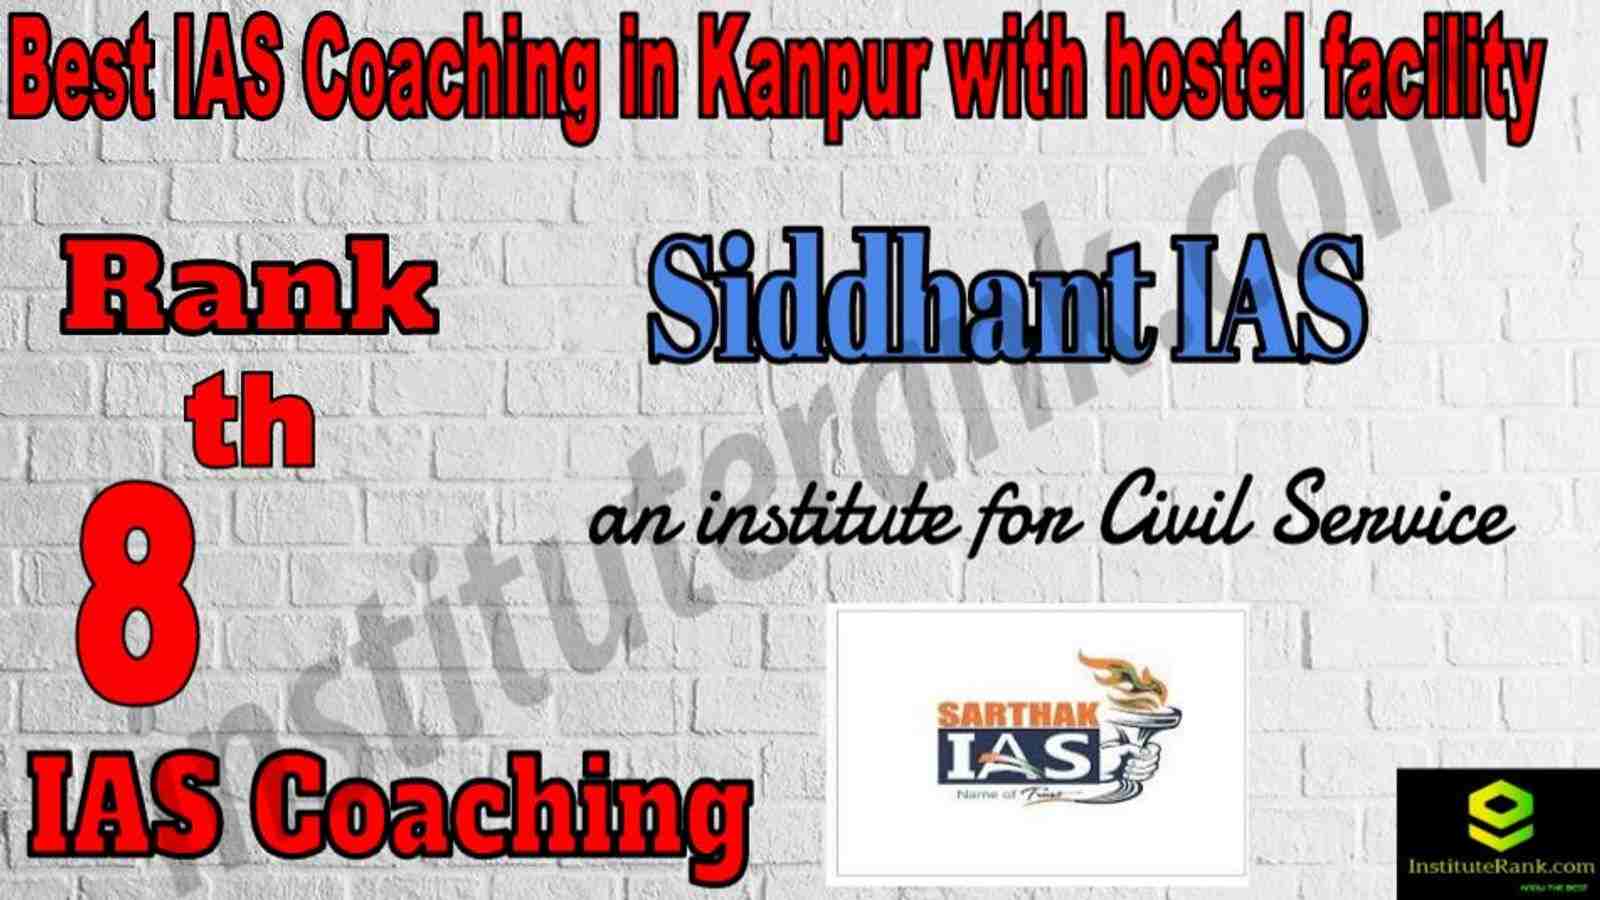 8th Best IAS Coaching in Kanpur With hostel facility